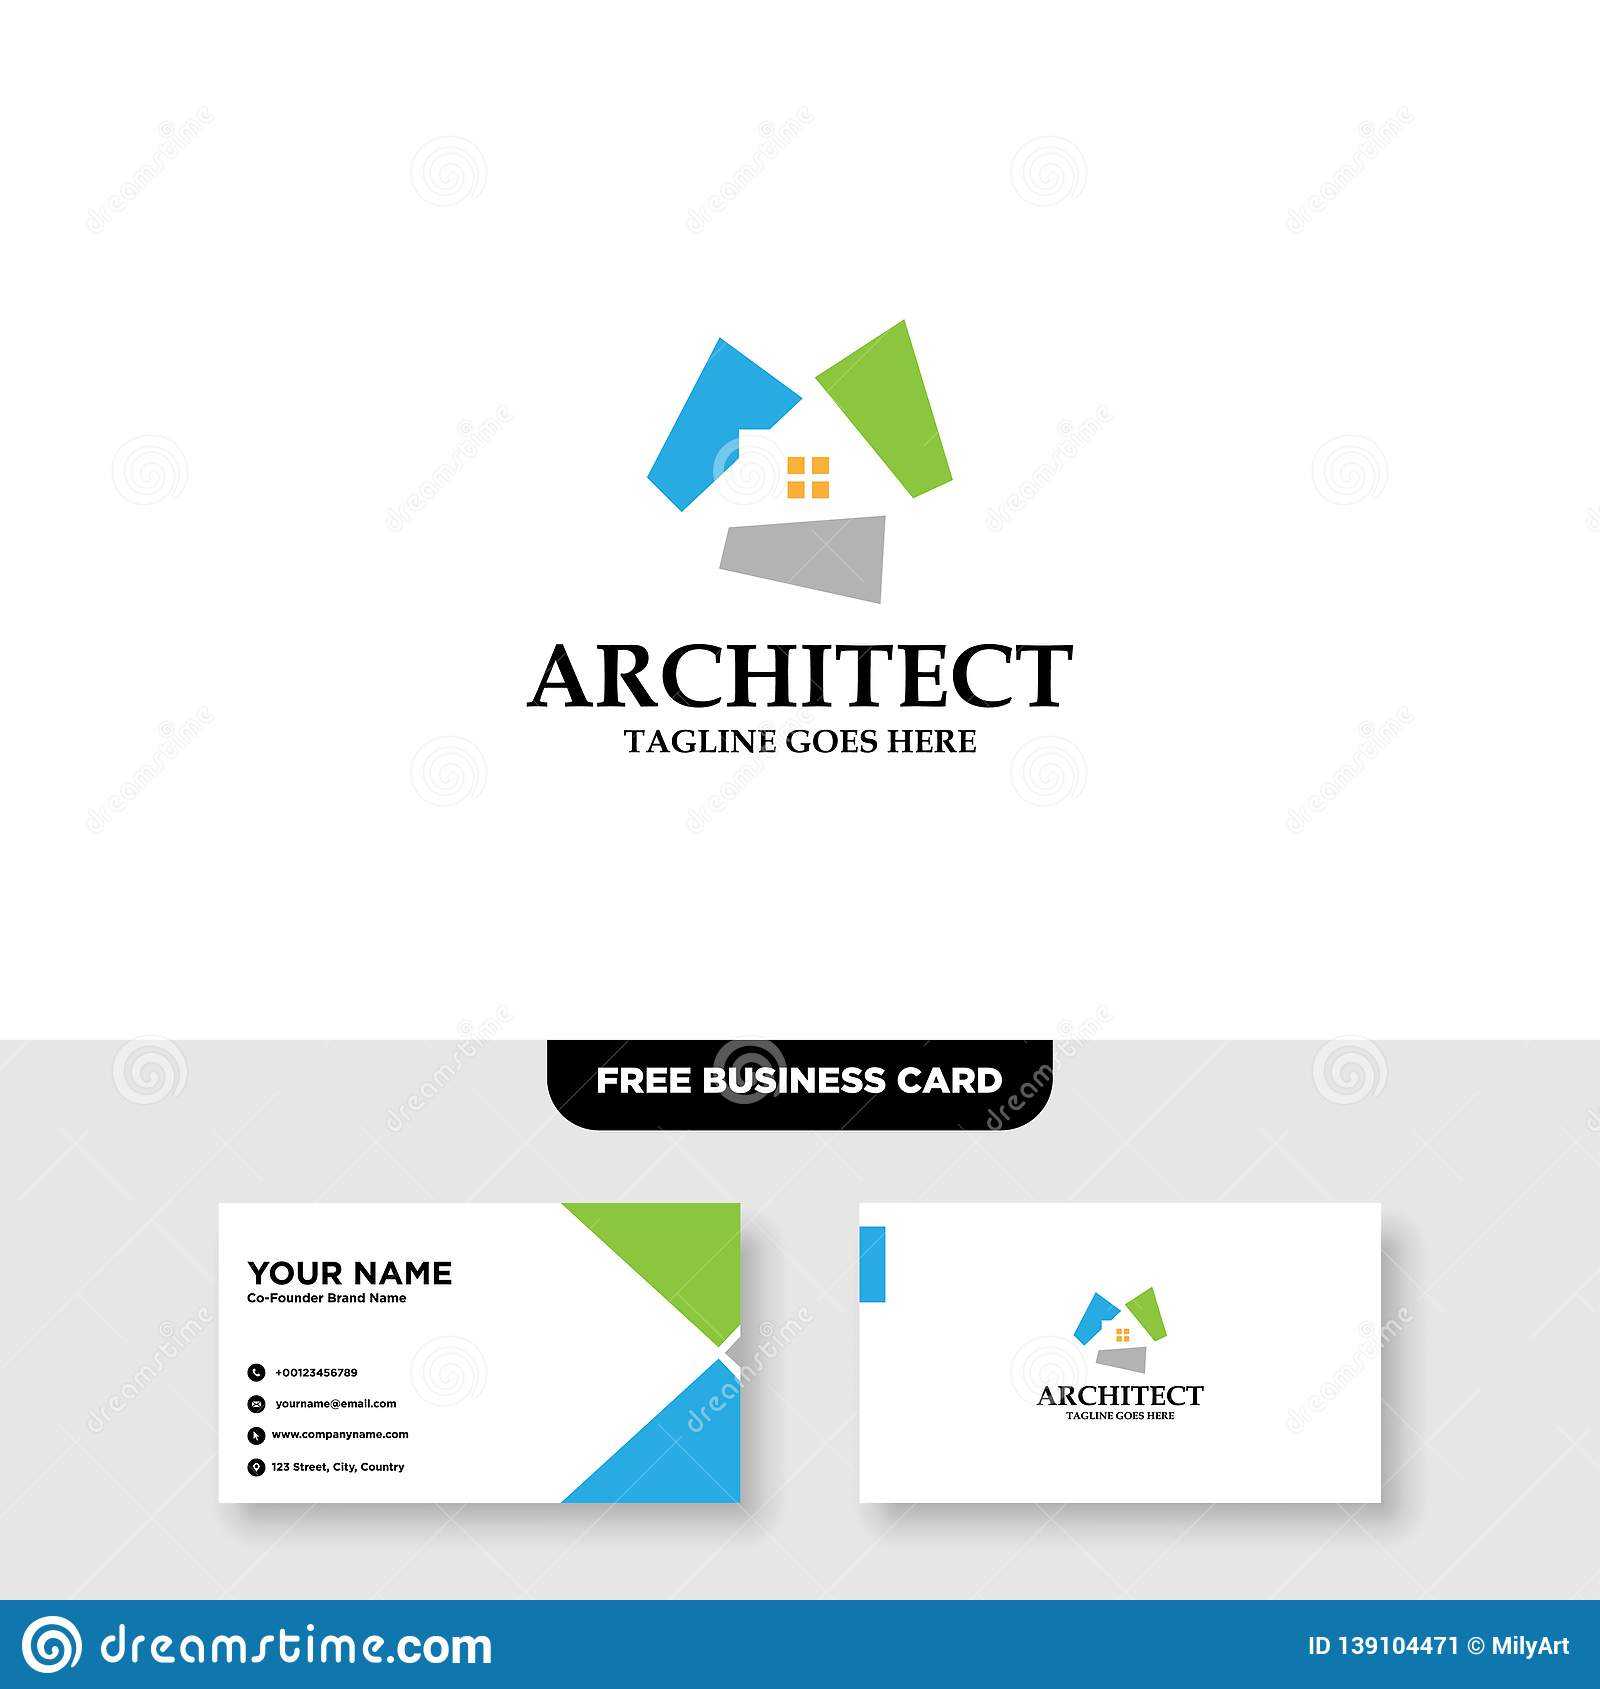 Architecture Company, Construction, Architect, Vector Logo Intended For Ibm Business Card Template